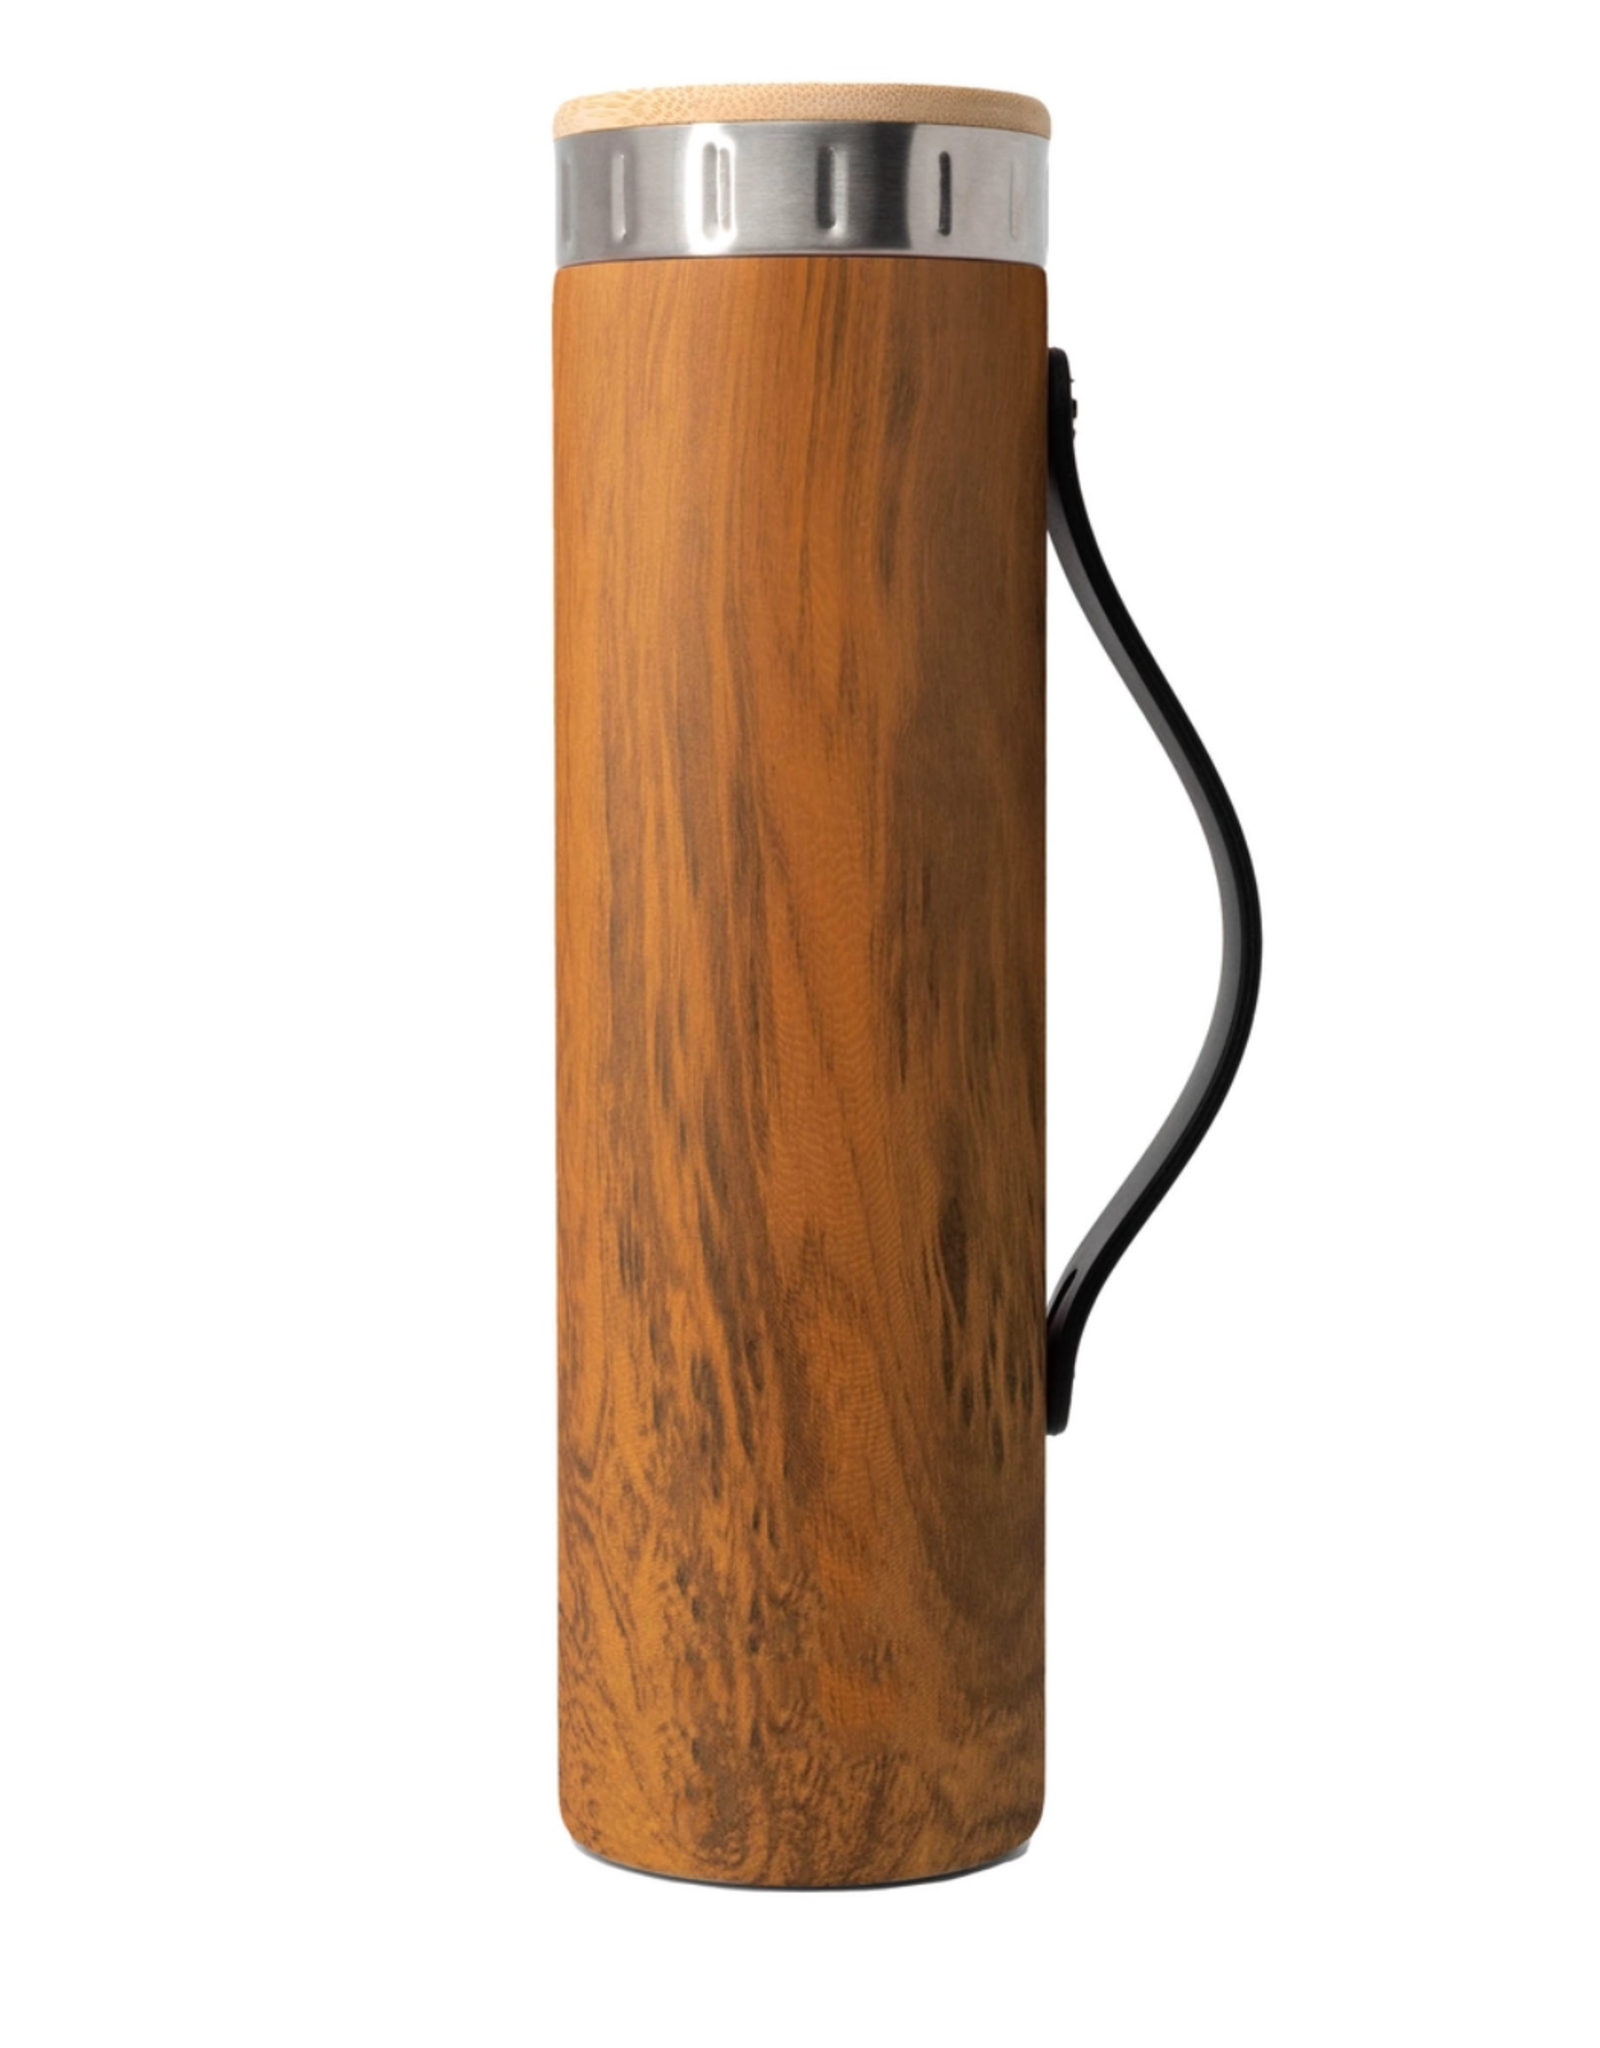 Iconic Teak Wood Water Bottle with Strap - 20 oz